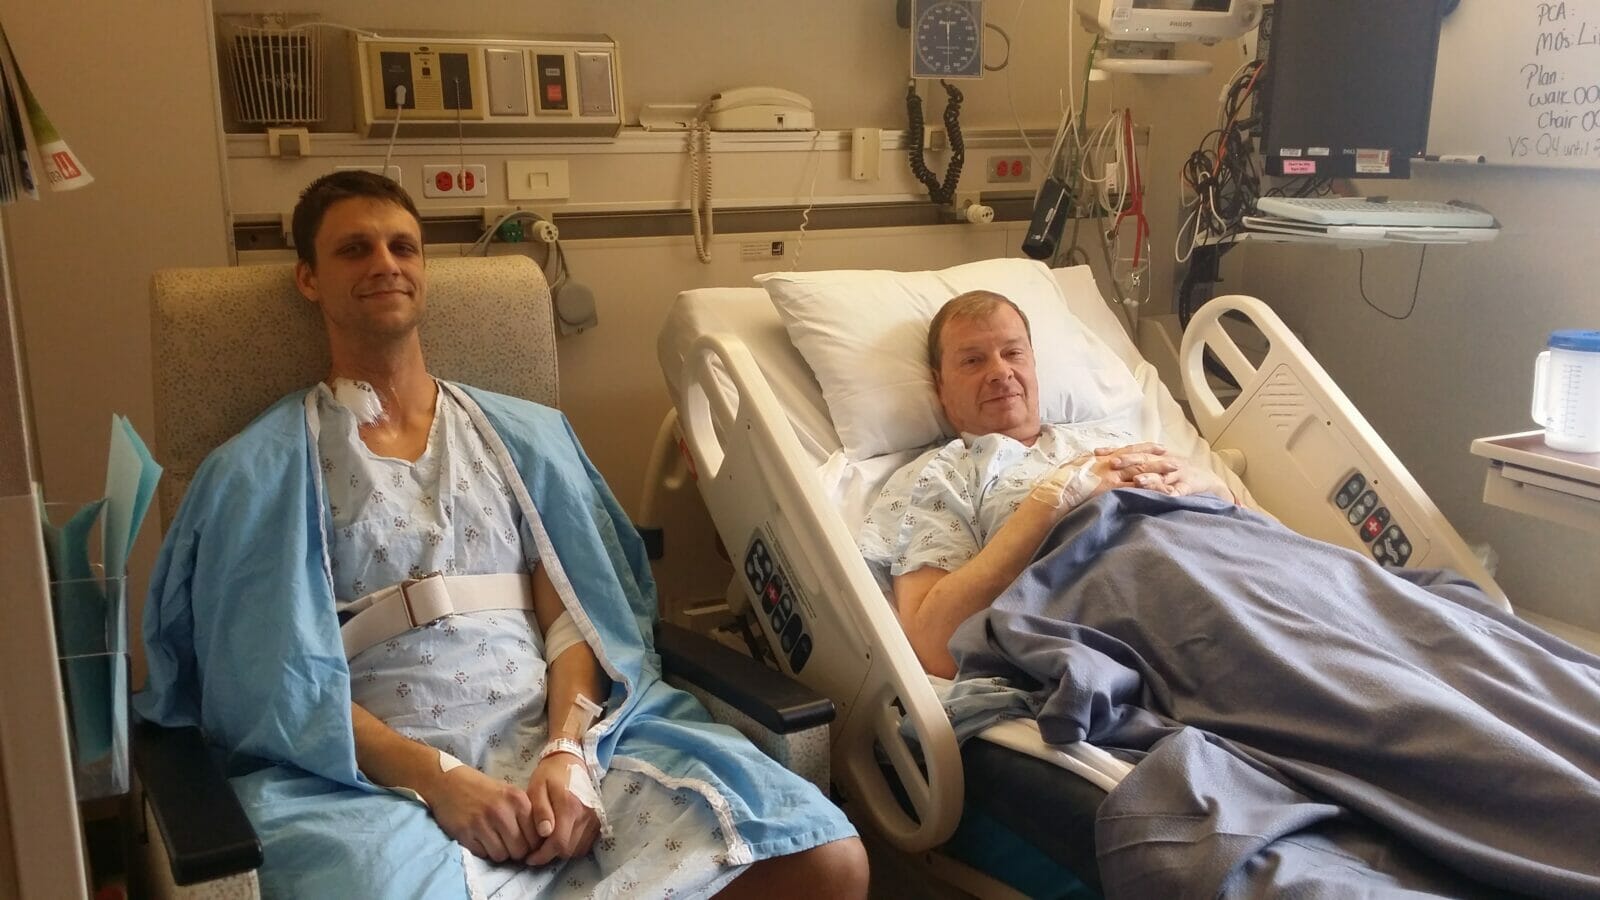 Bryan and his father in law in the hospital